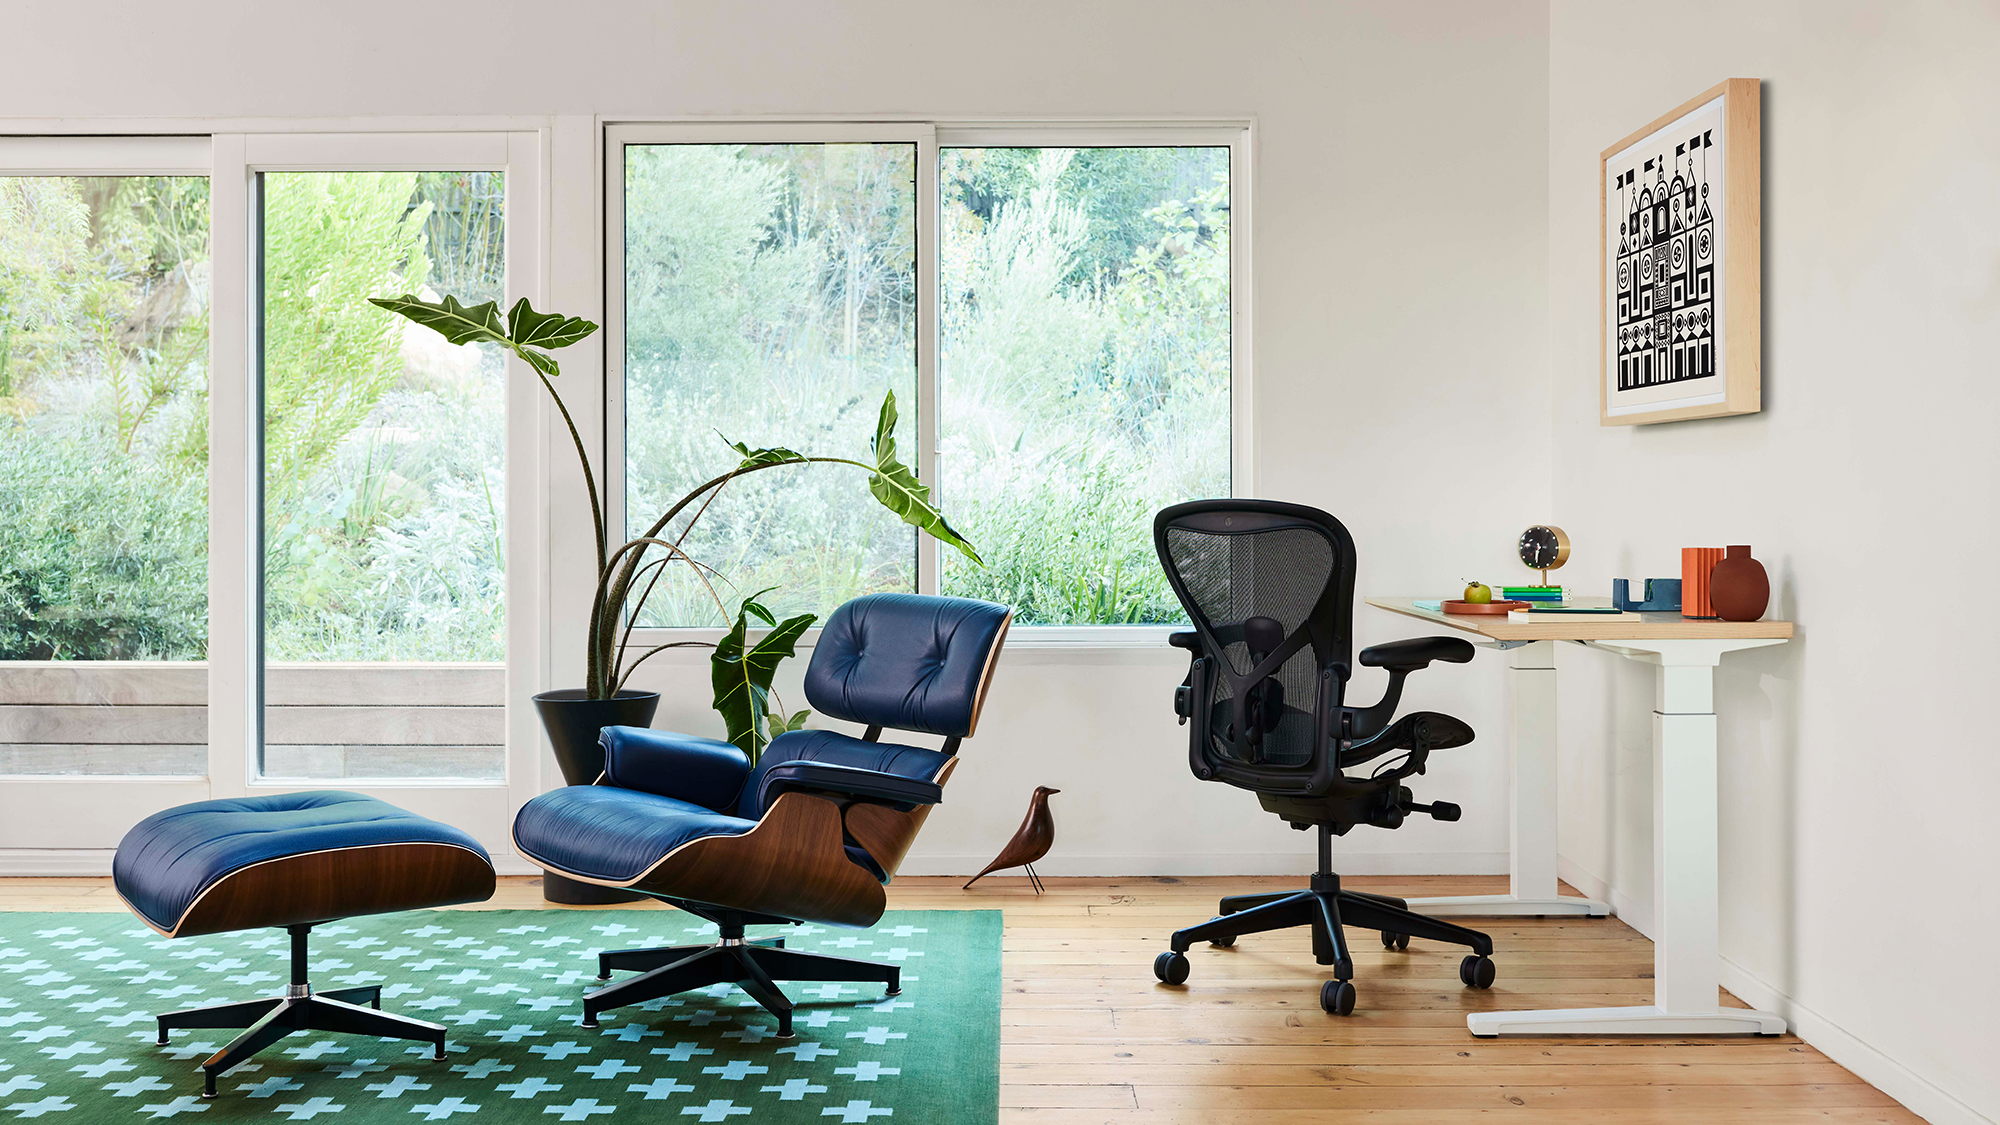 Aeron office chair revolutionized office seating with its defining design qualities: the pioneering Pellicle suspension material and its patented PostureFit SL back support, which affords the ideal sit — chest open, shoulders back, pelvis tilted slightly forward.